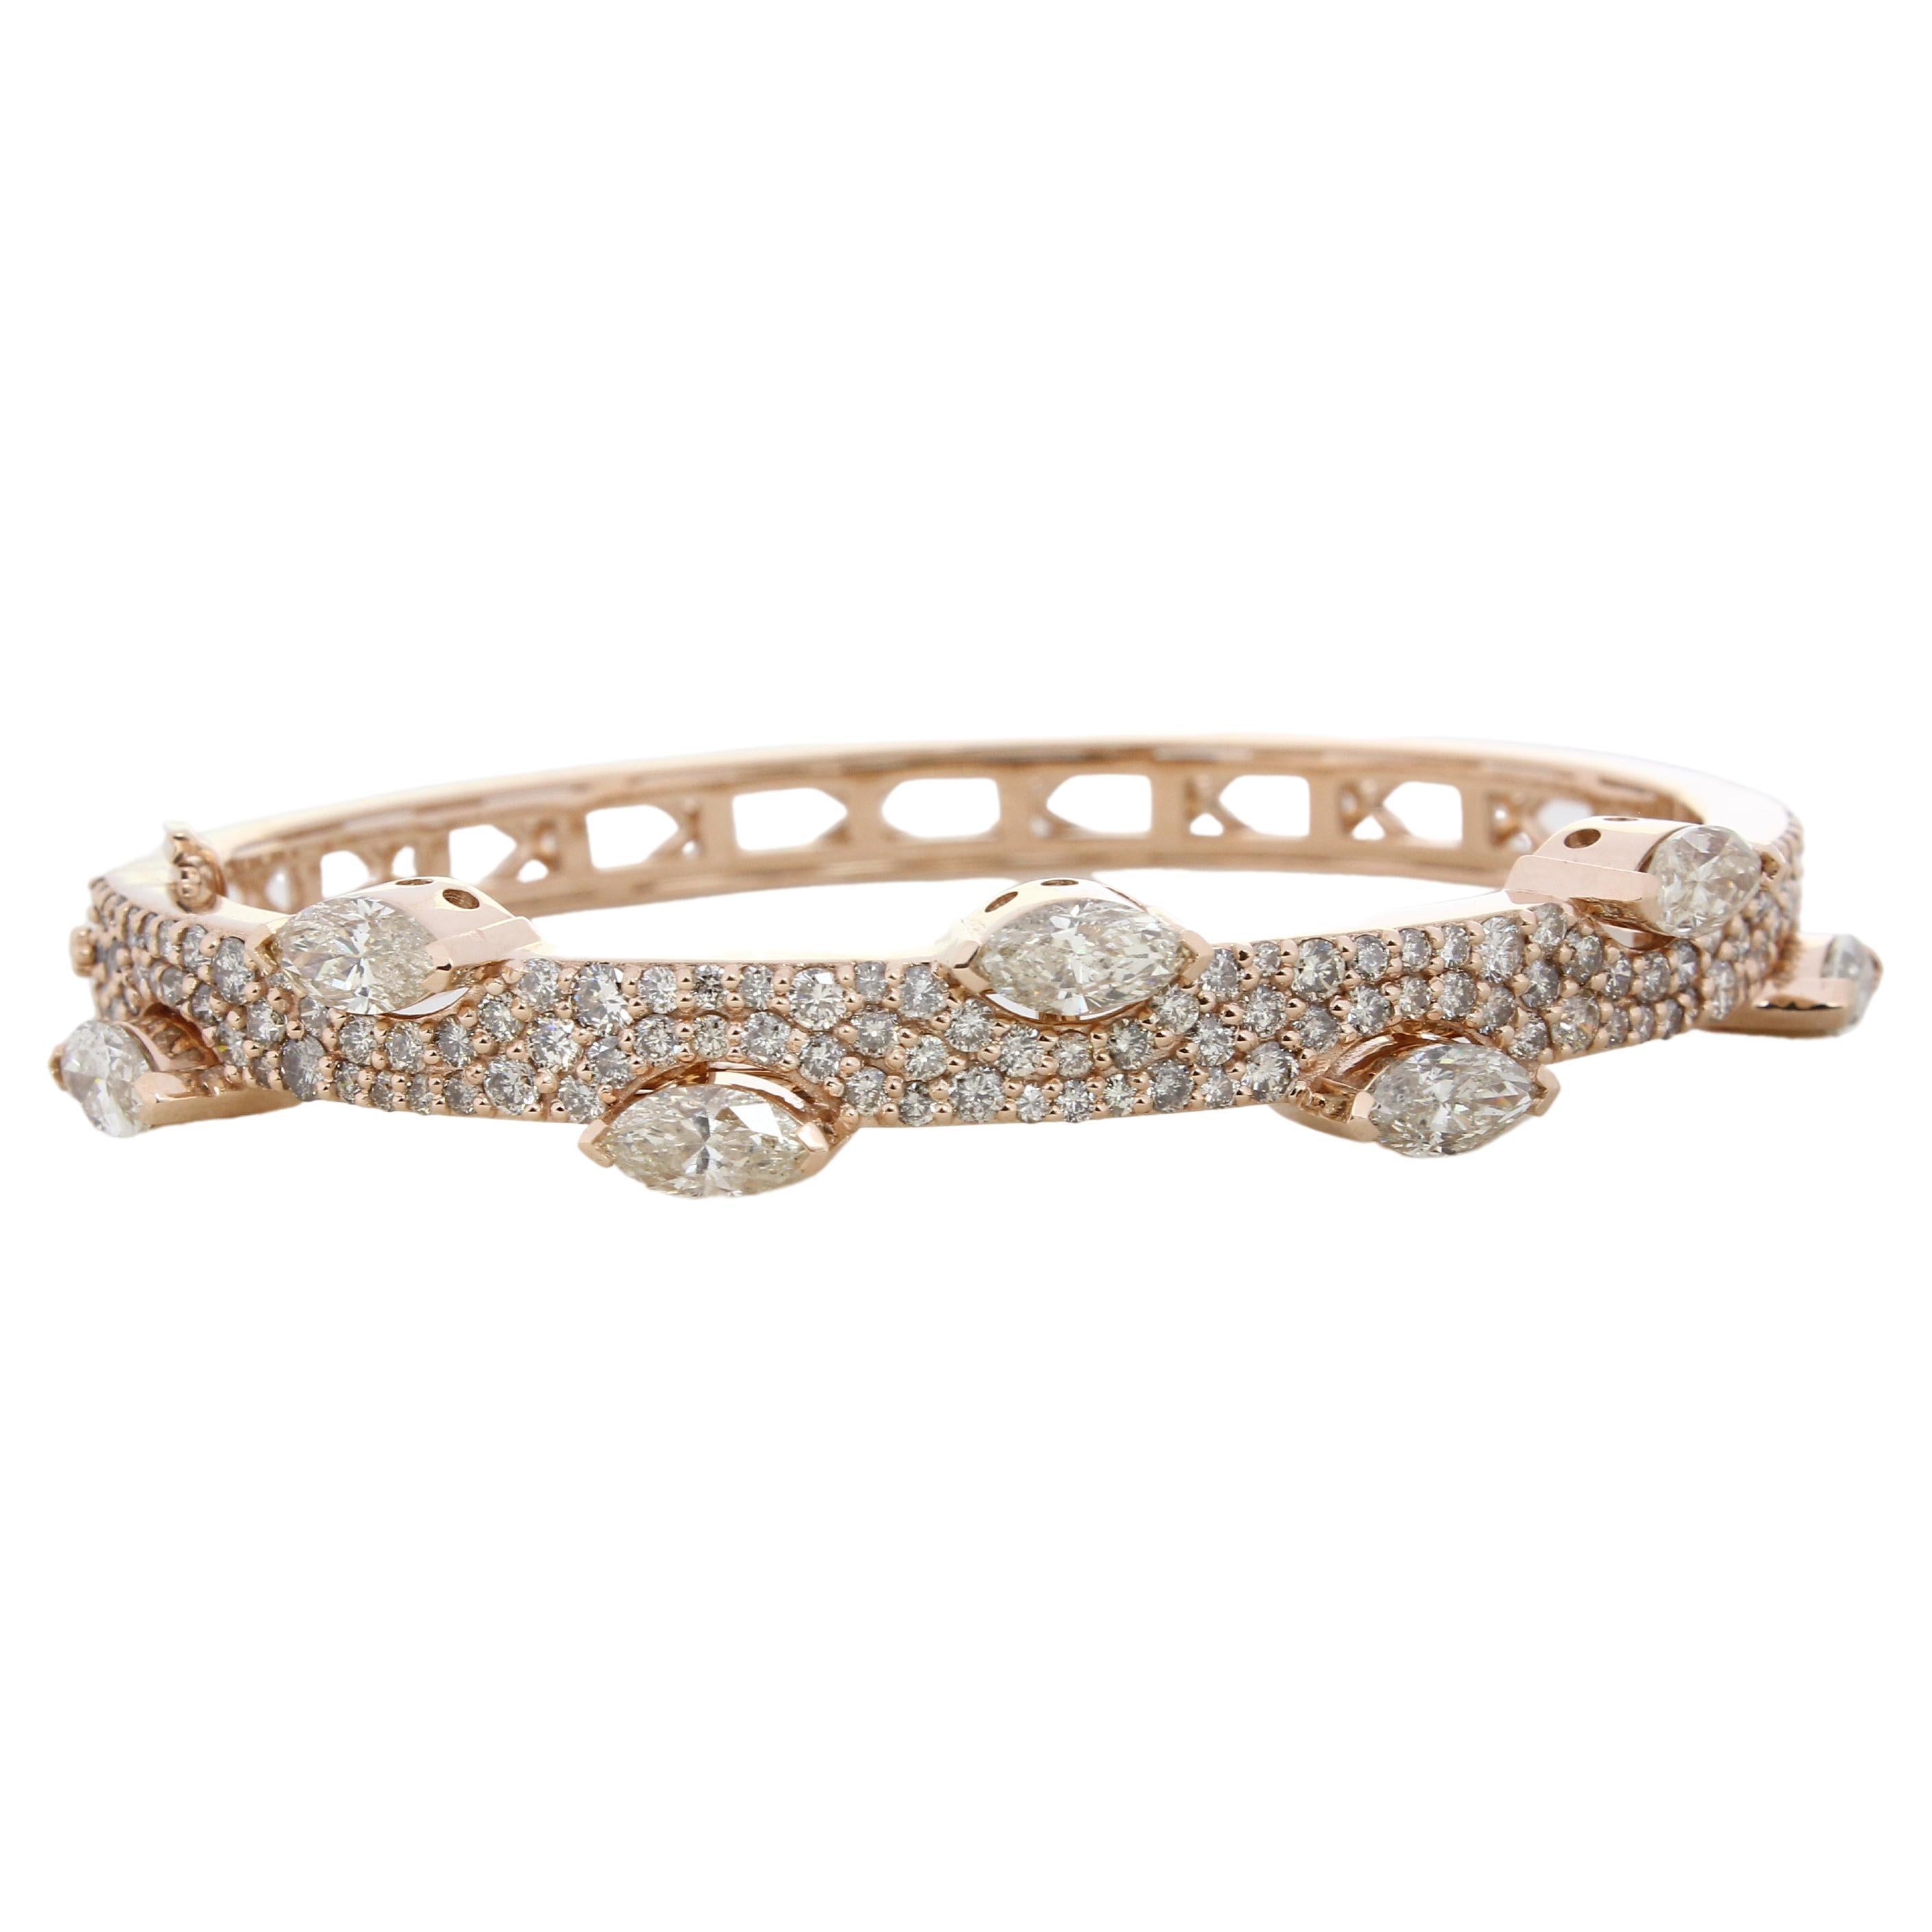 Marquise Diamonds Bracelet in 18k Solid Gold